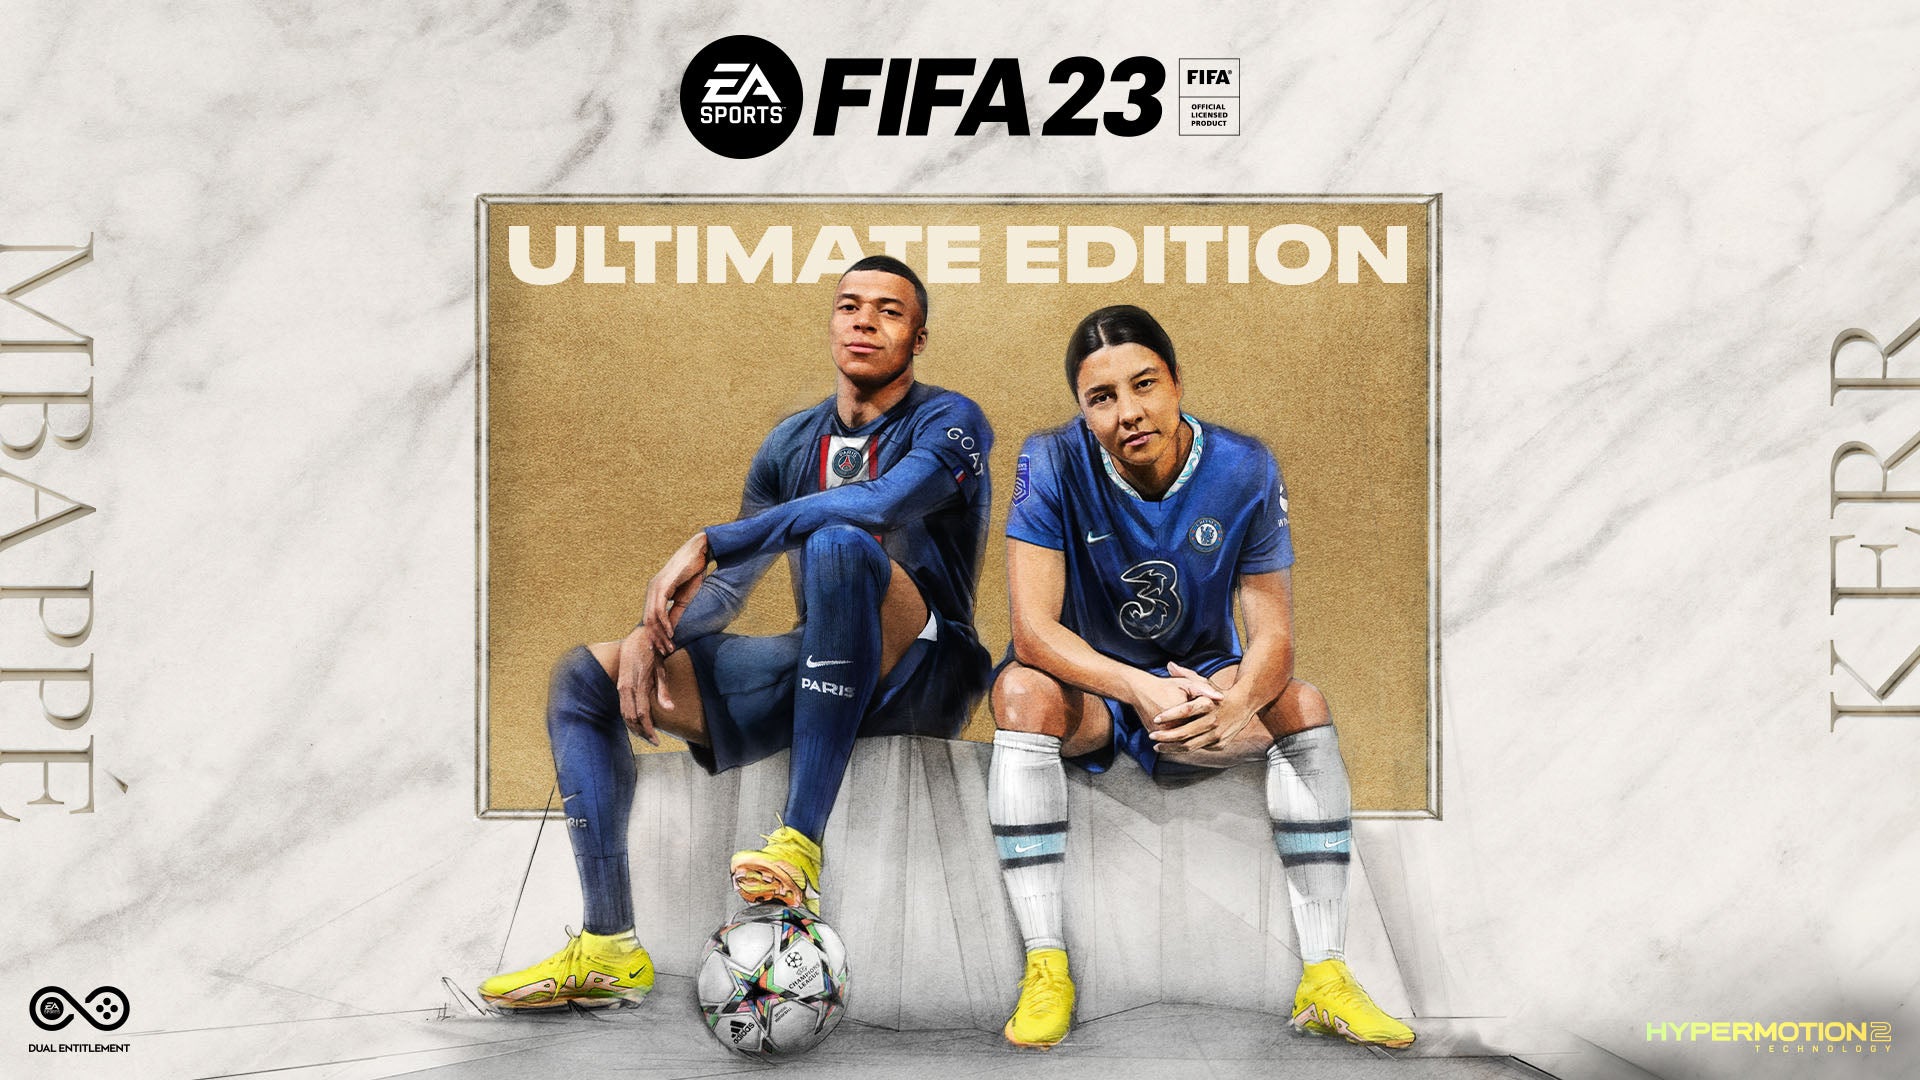 Kylian Mbappe and Sam Kerr on the FIFA 23 Ultimate Edition cover